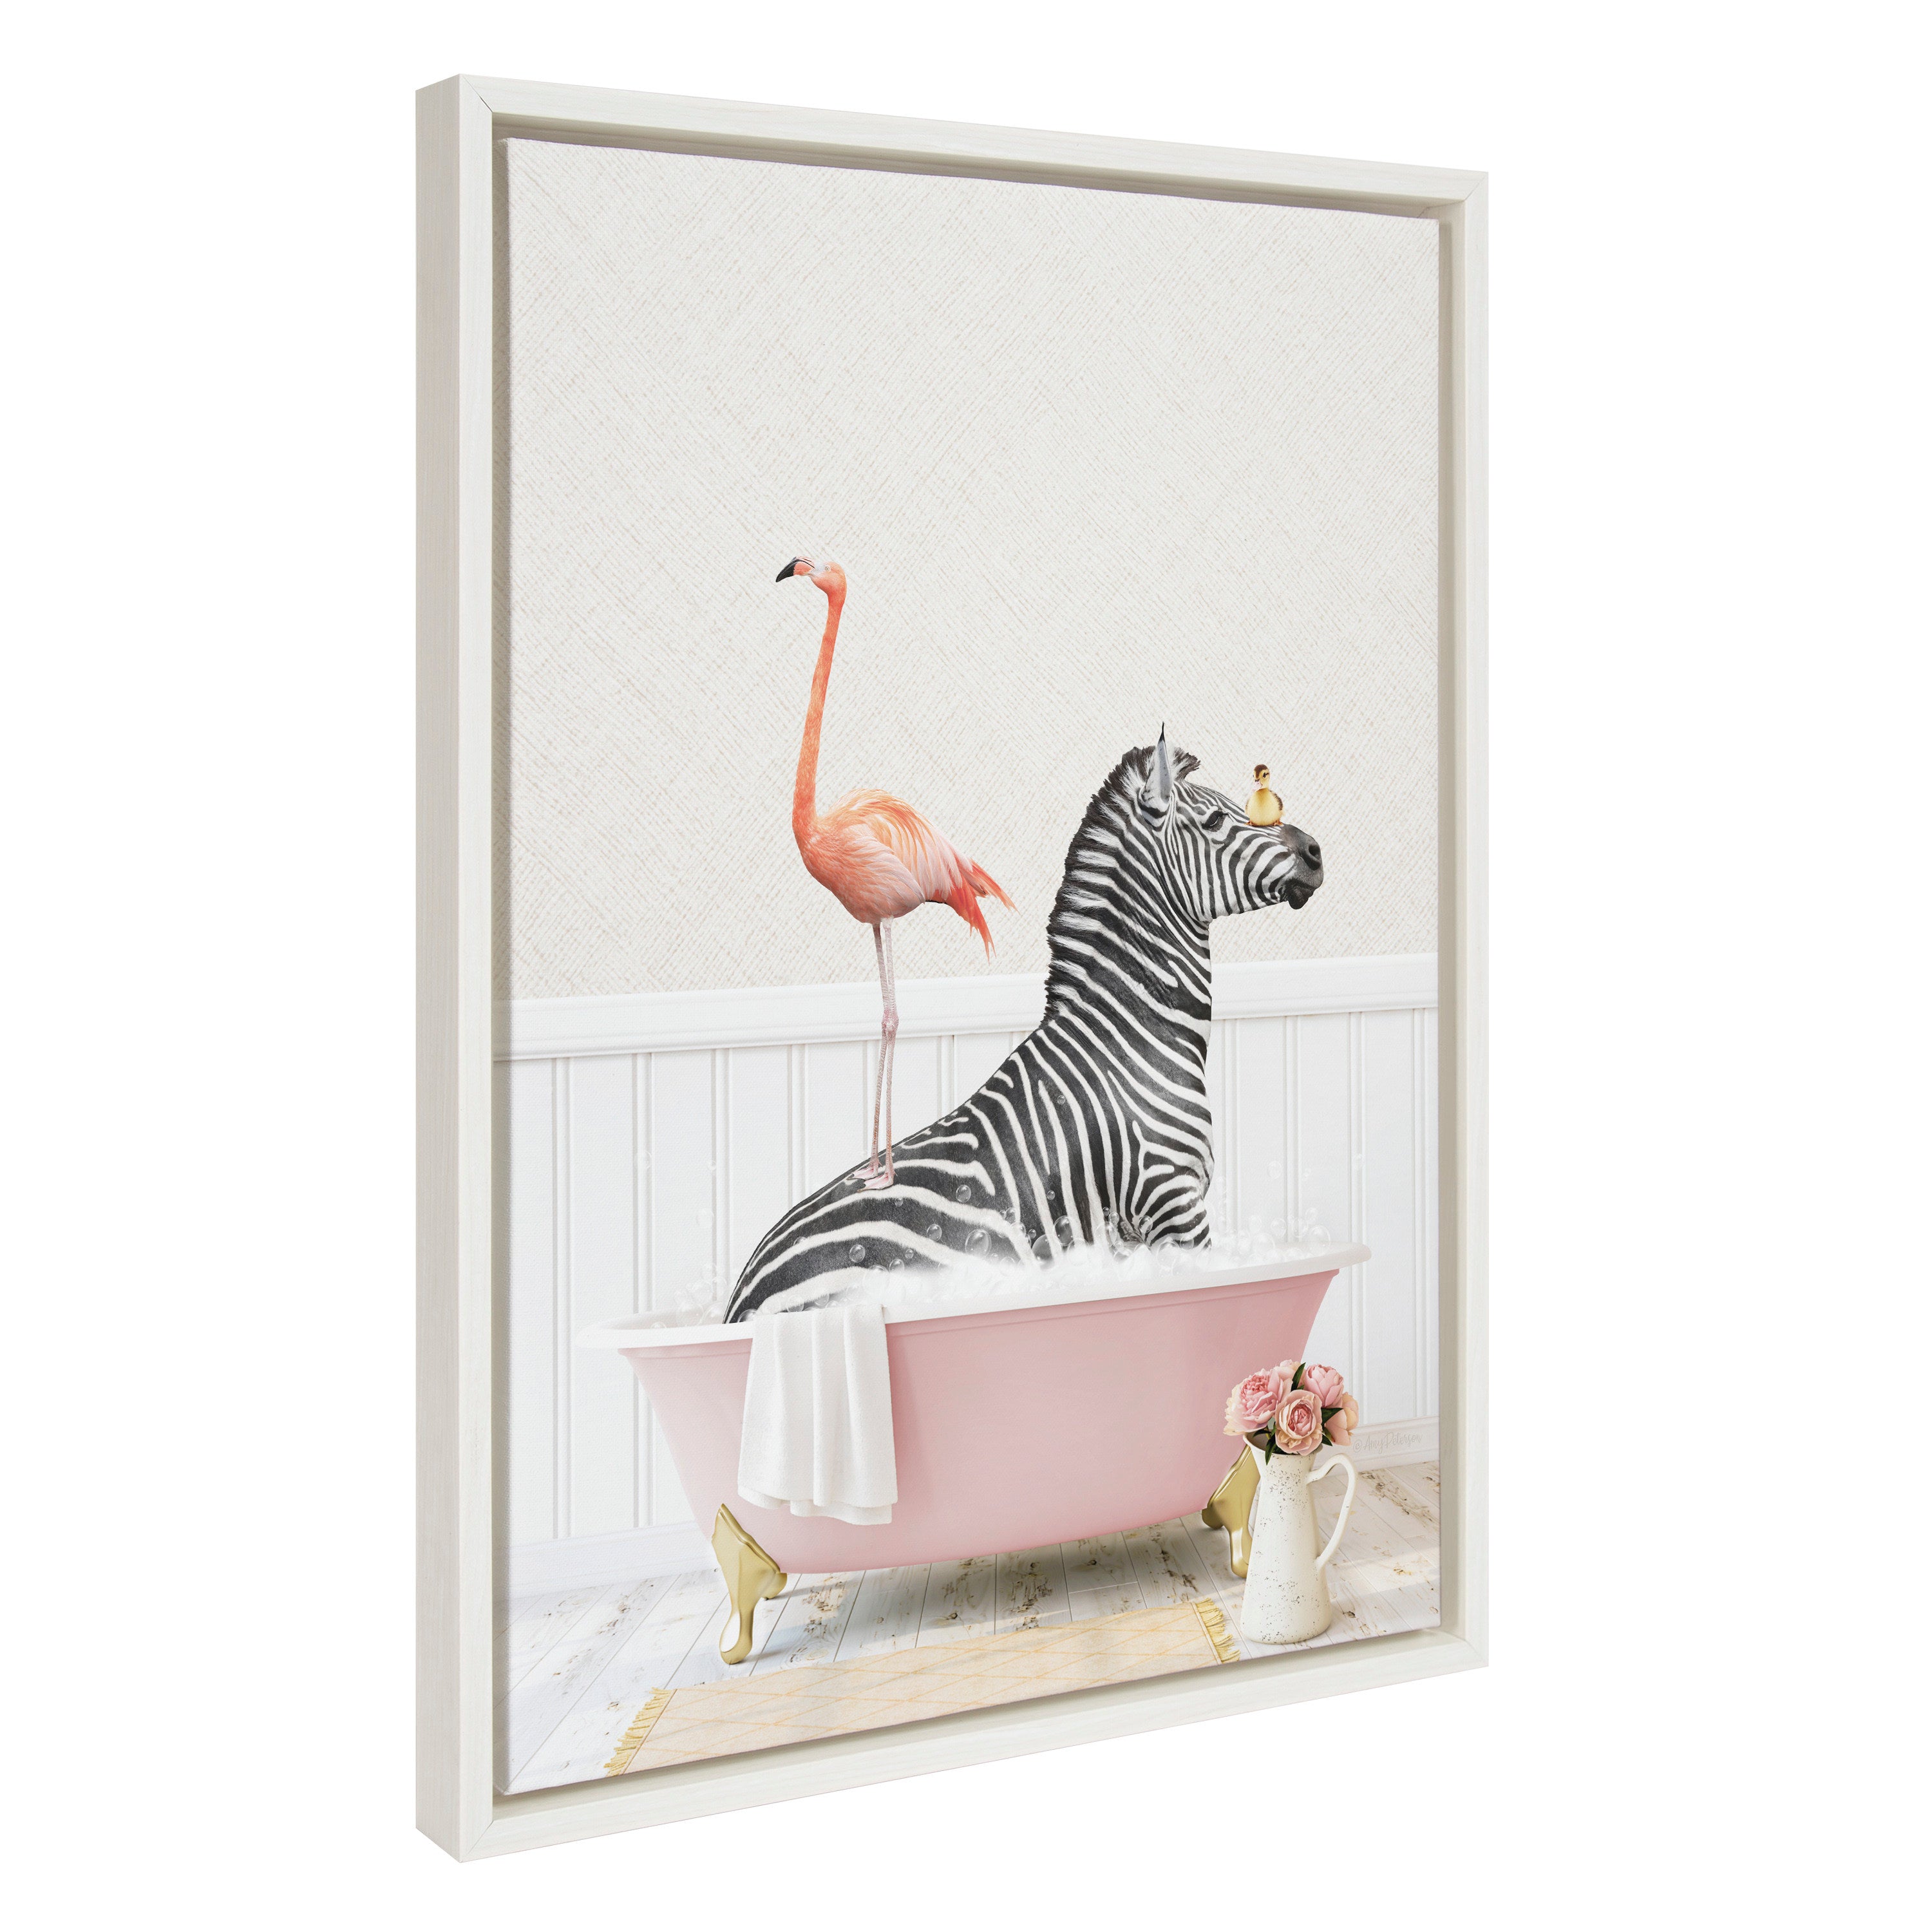 Sylvie Zebra and Flamingo in Cottage Rose Bath Framed Canvas by Amy Peterson Art Studio